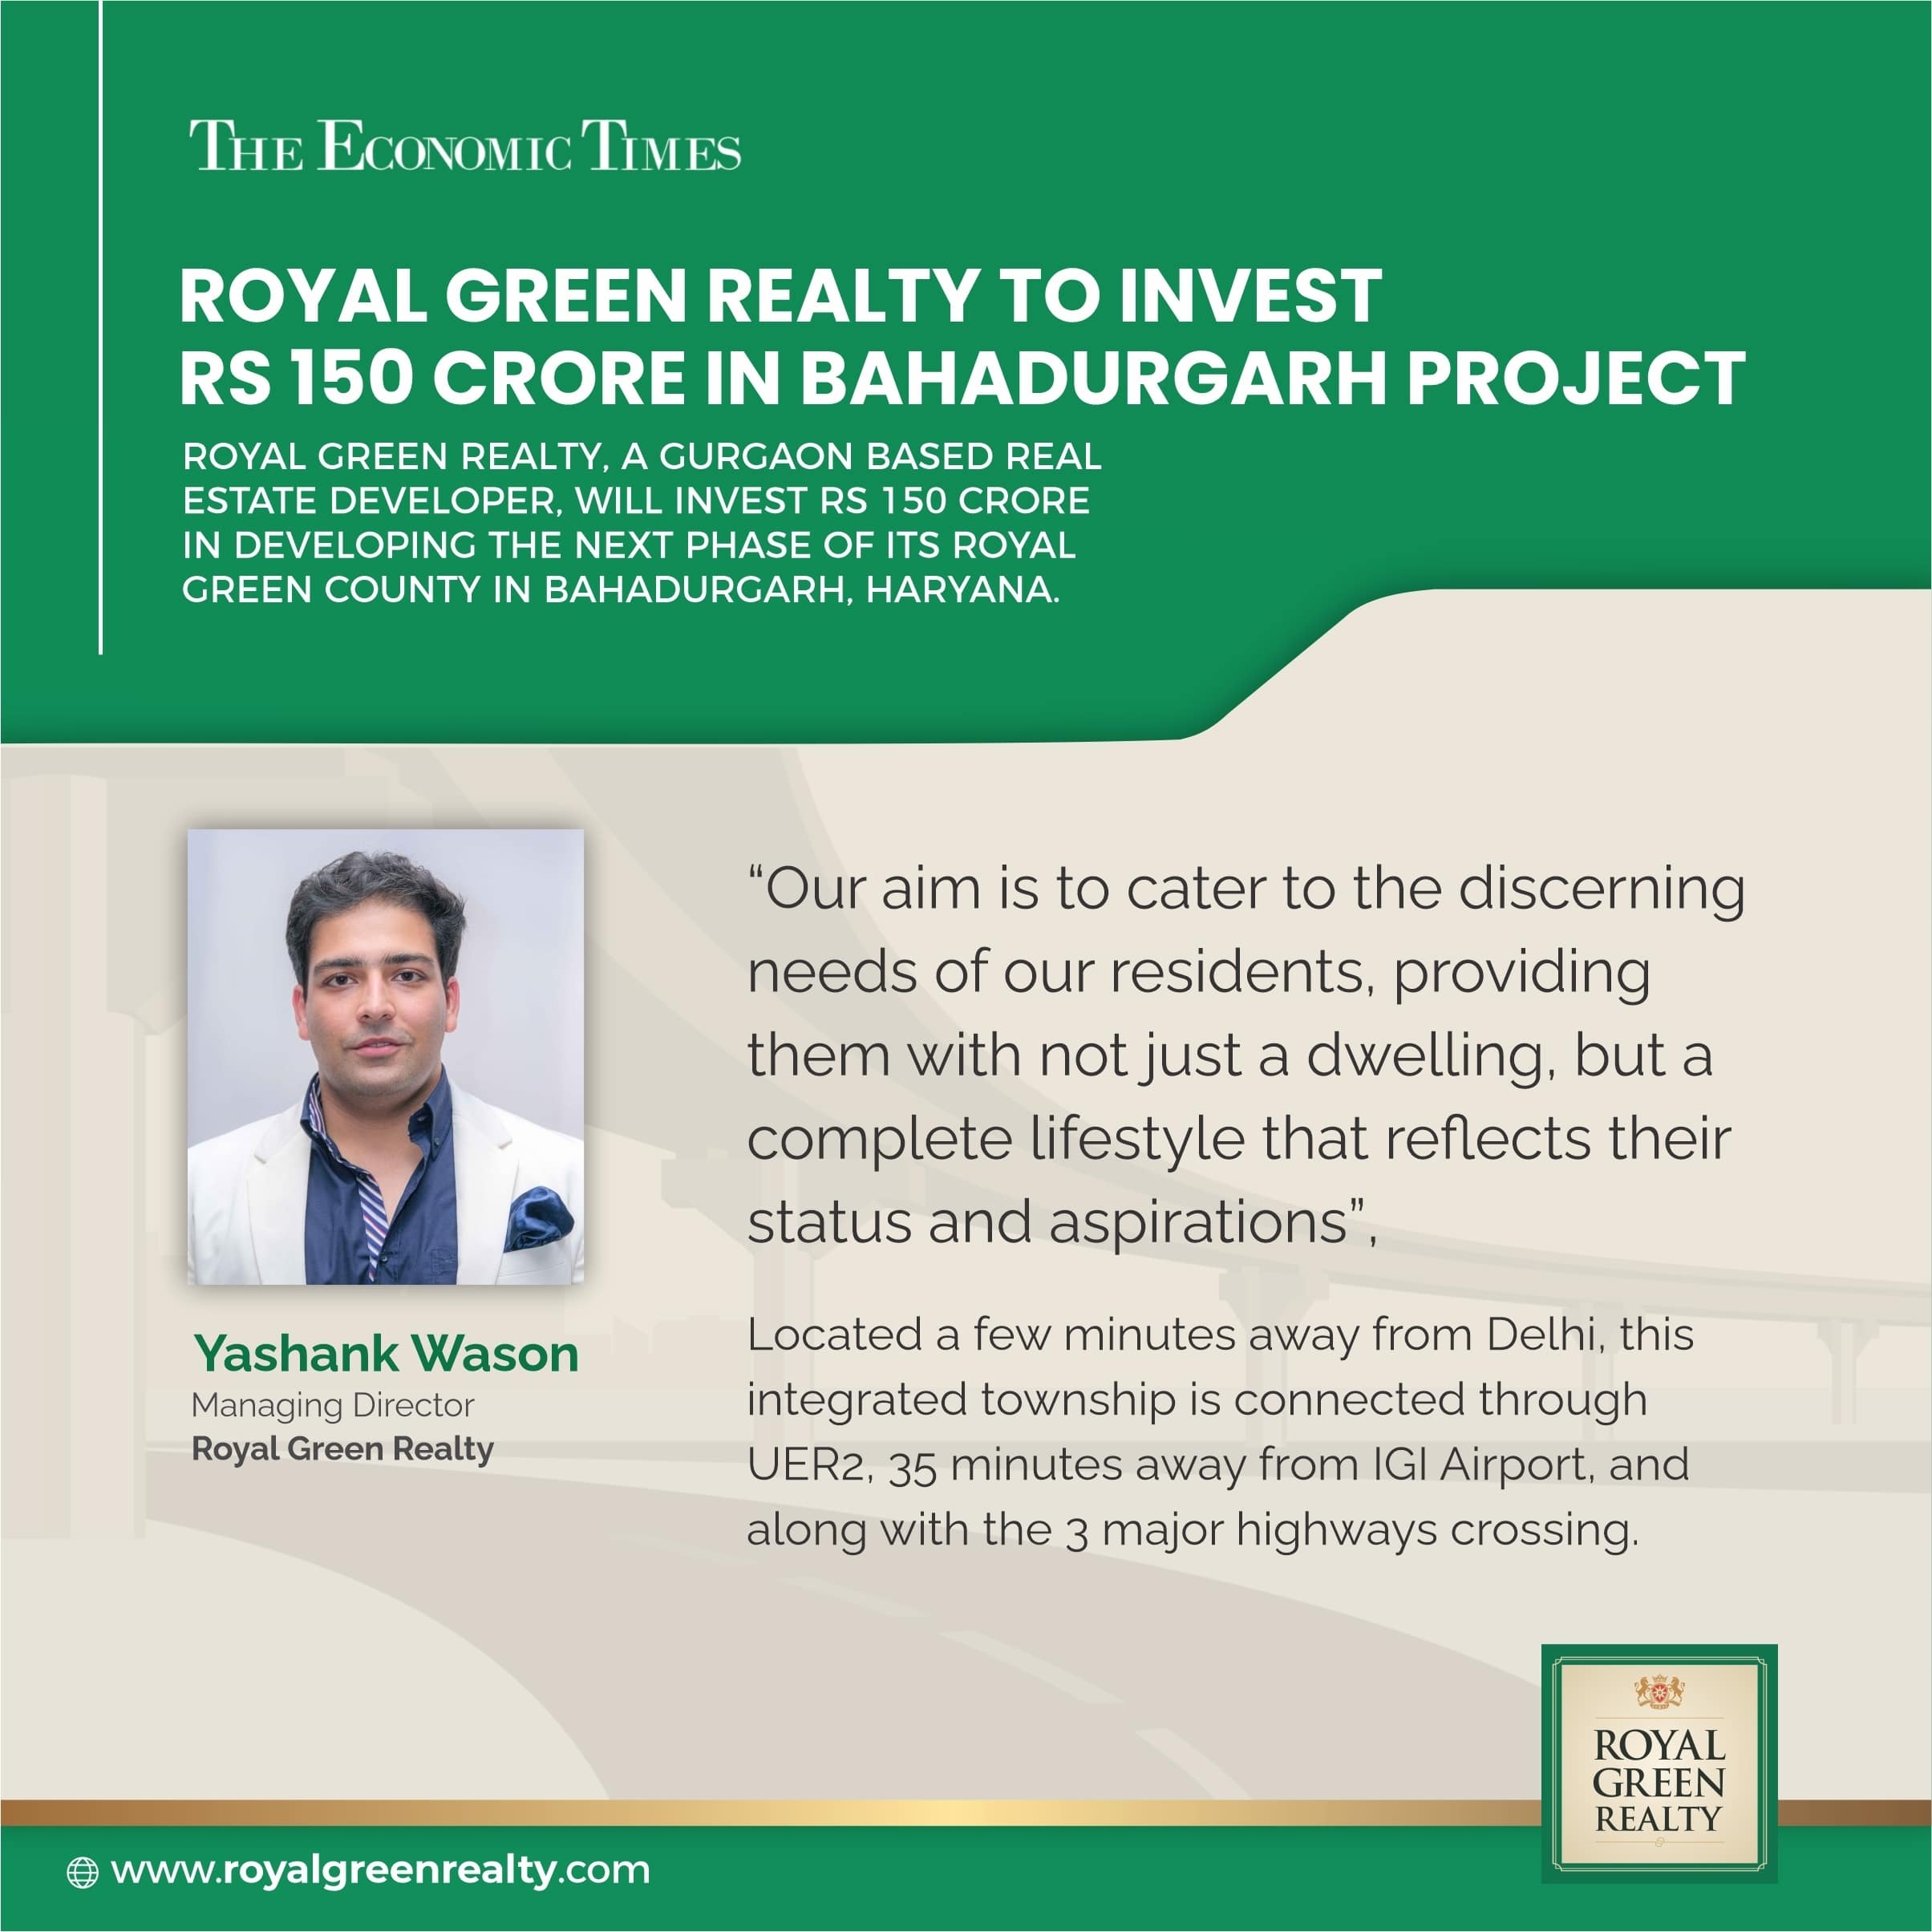 Royal Green Realty to invest Rs 150 crore in Bahadurgarh project